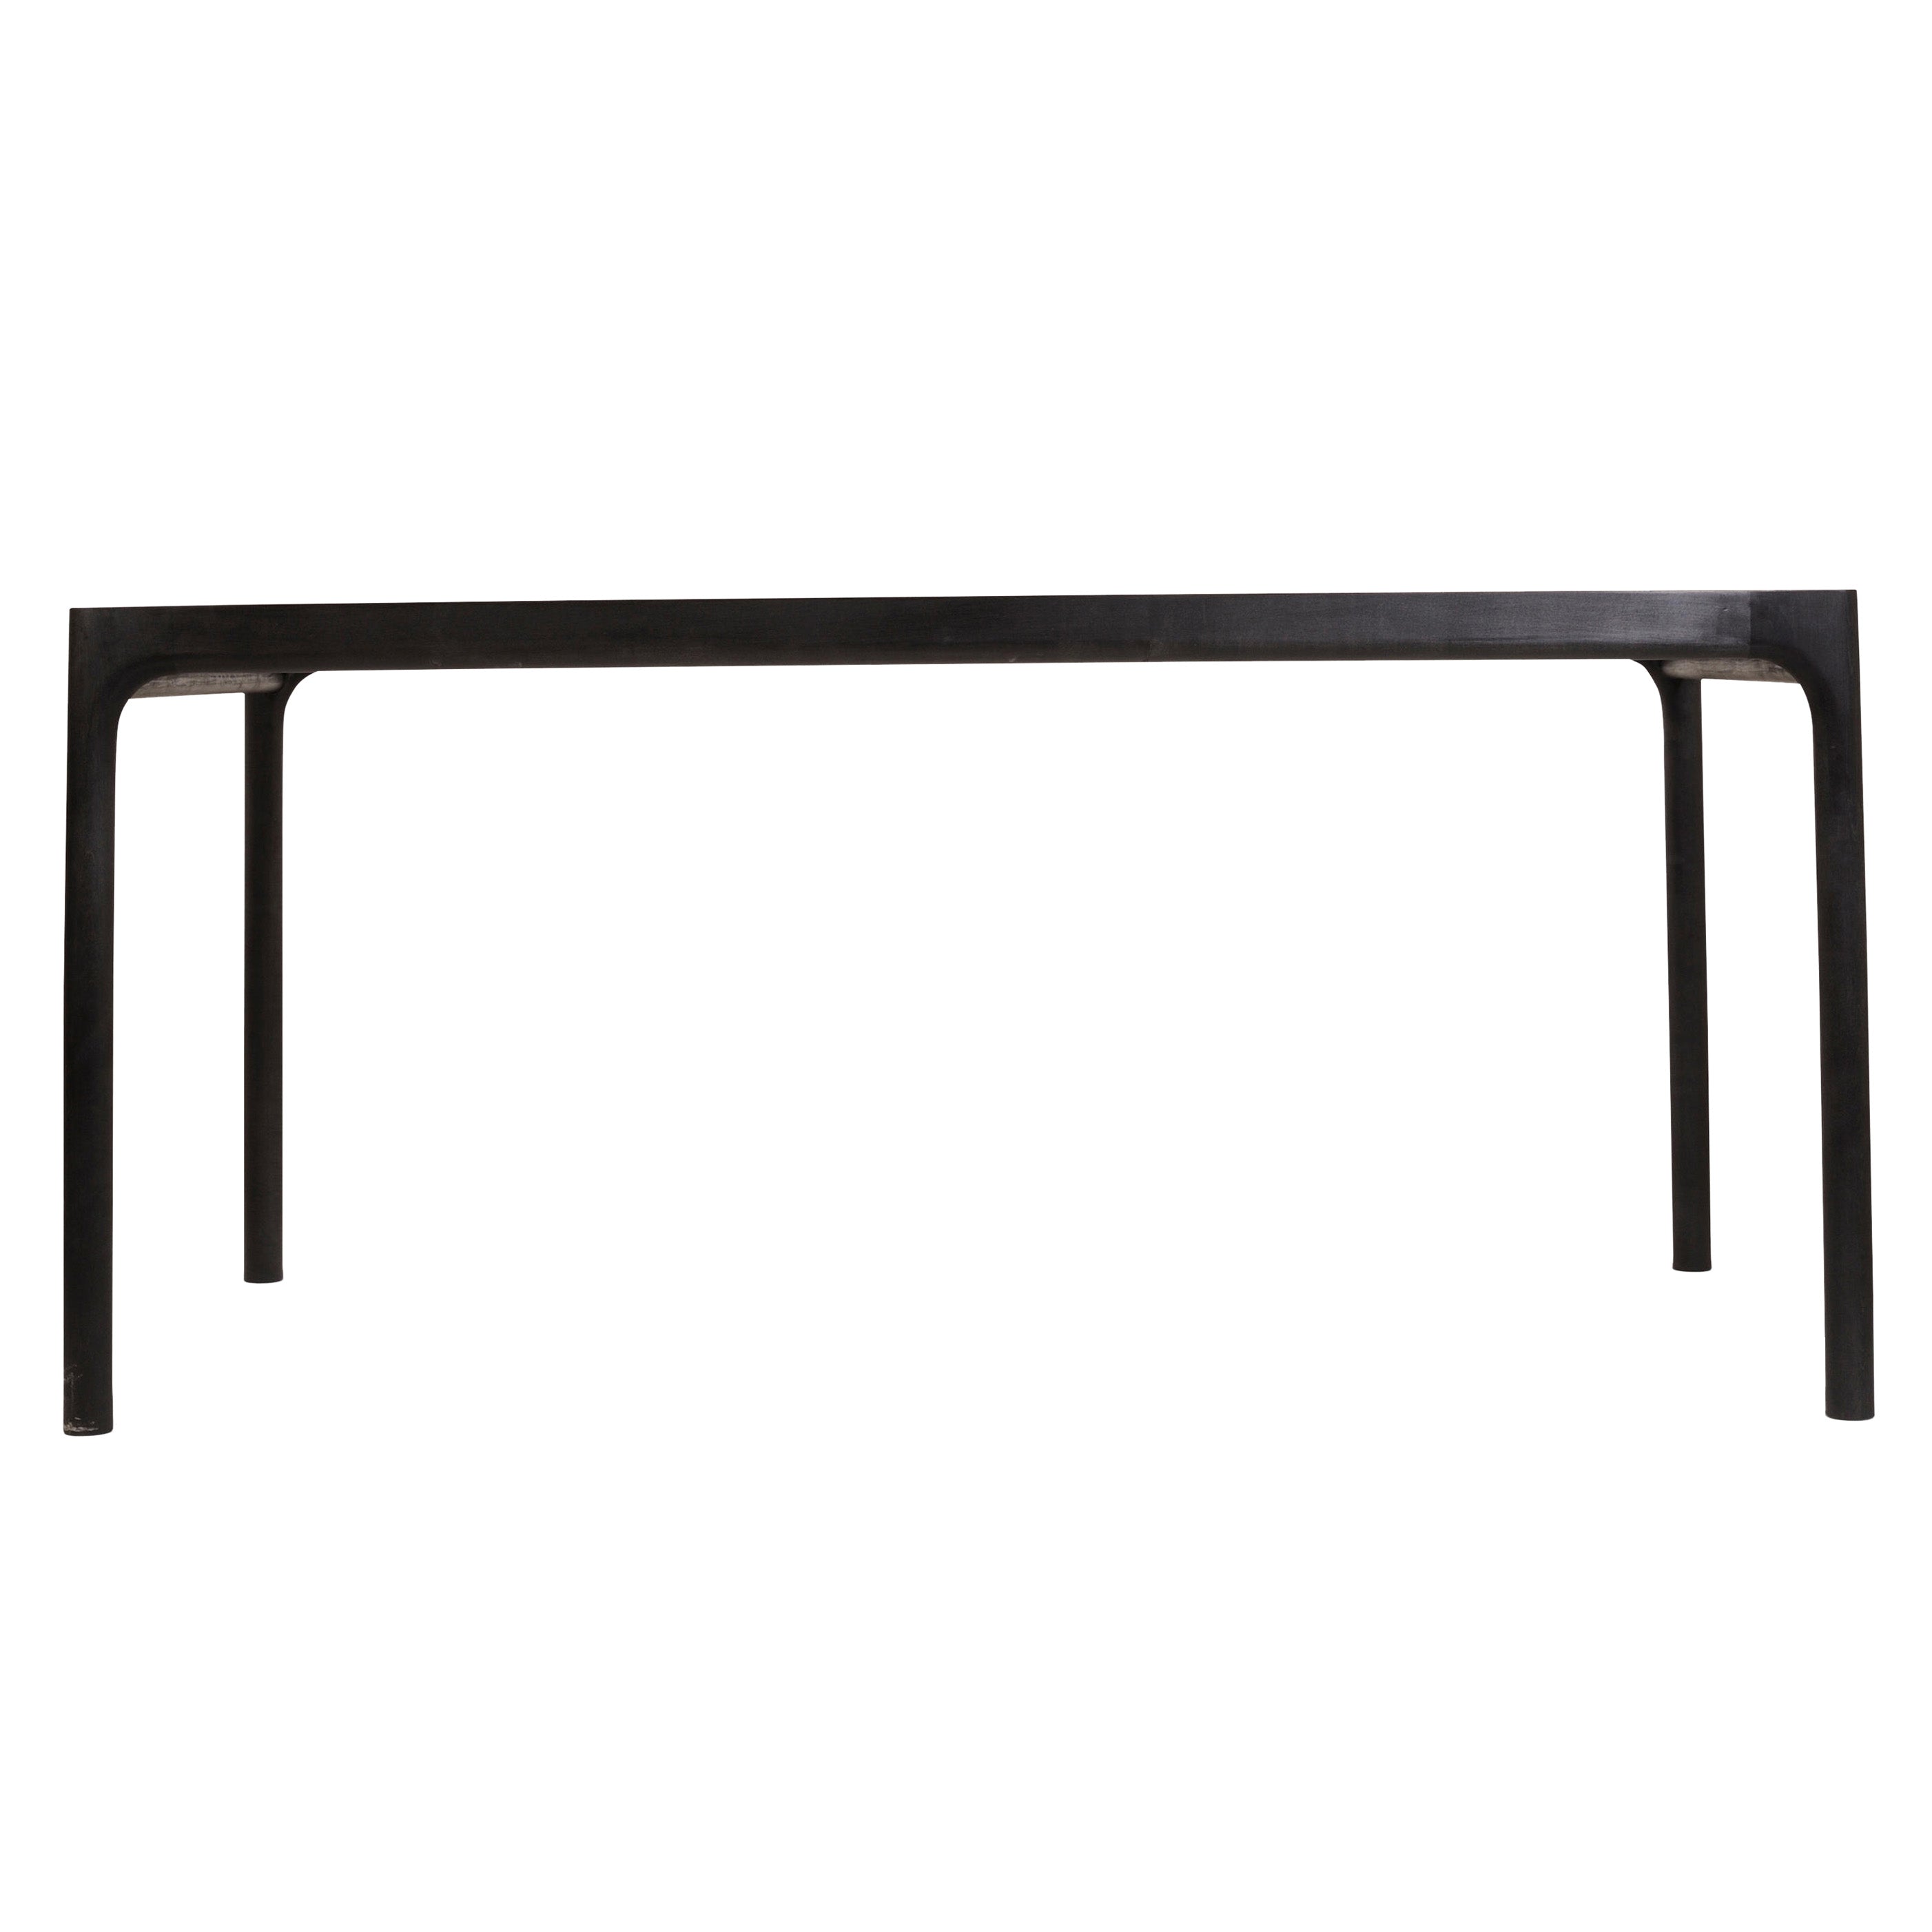 Unna Table: Large - 86.6